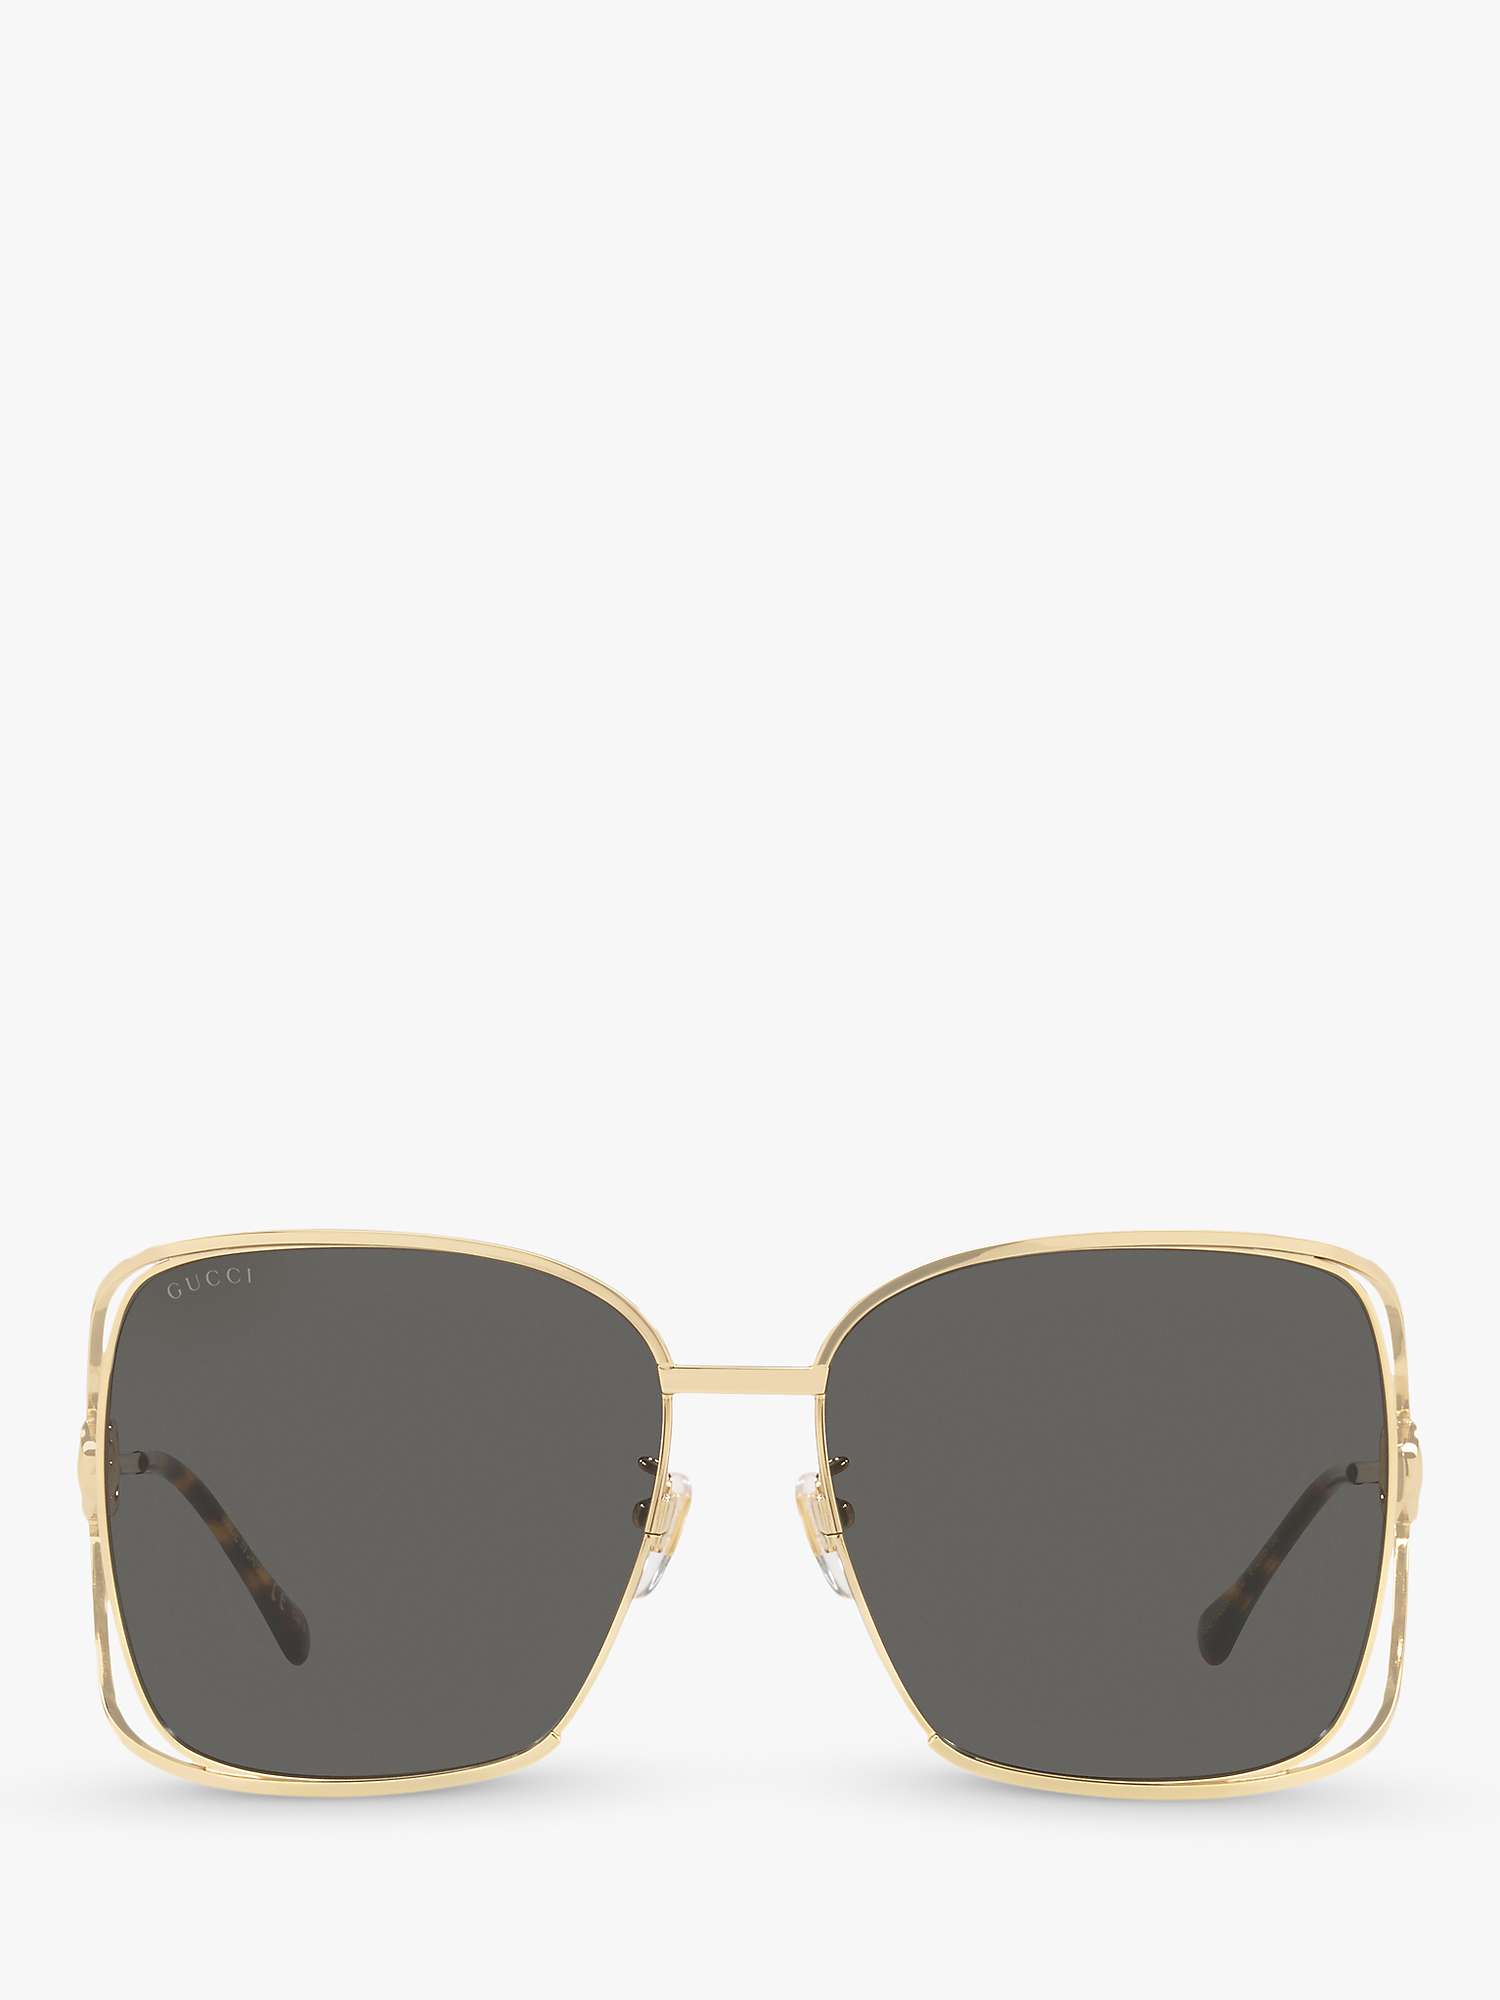 Gucci GG1020S Women's Square Sunglasses, Gold/Grey at John Lewis & Partners